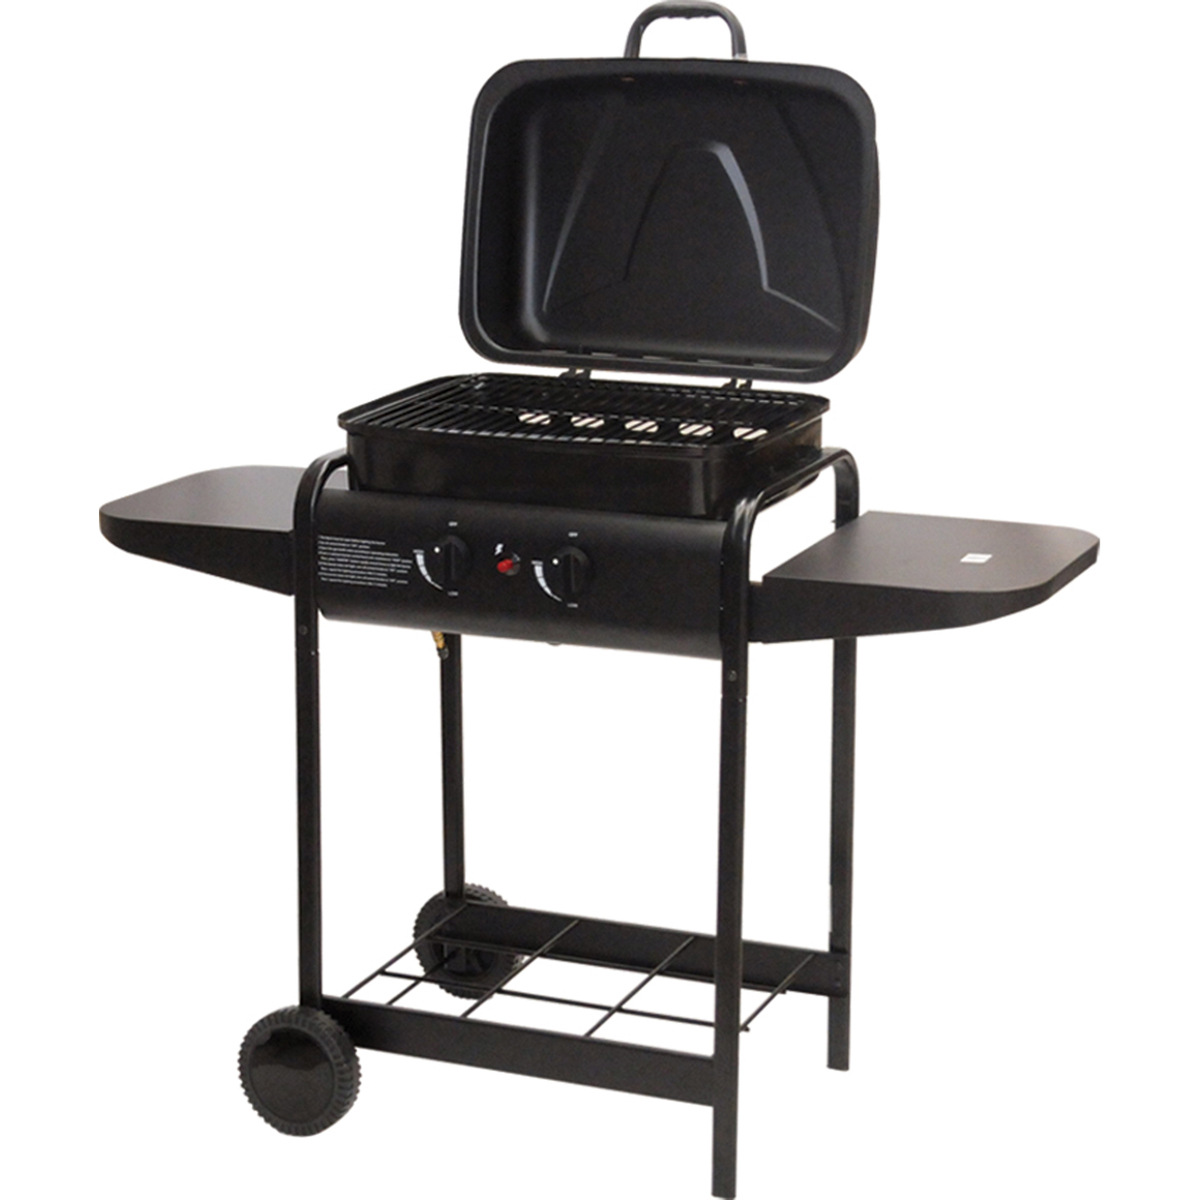 Relax BBQ GAS Grill GY-01